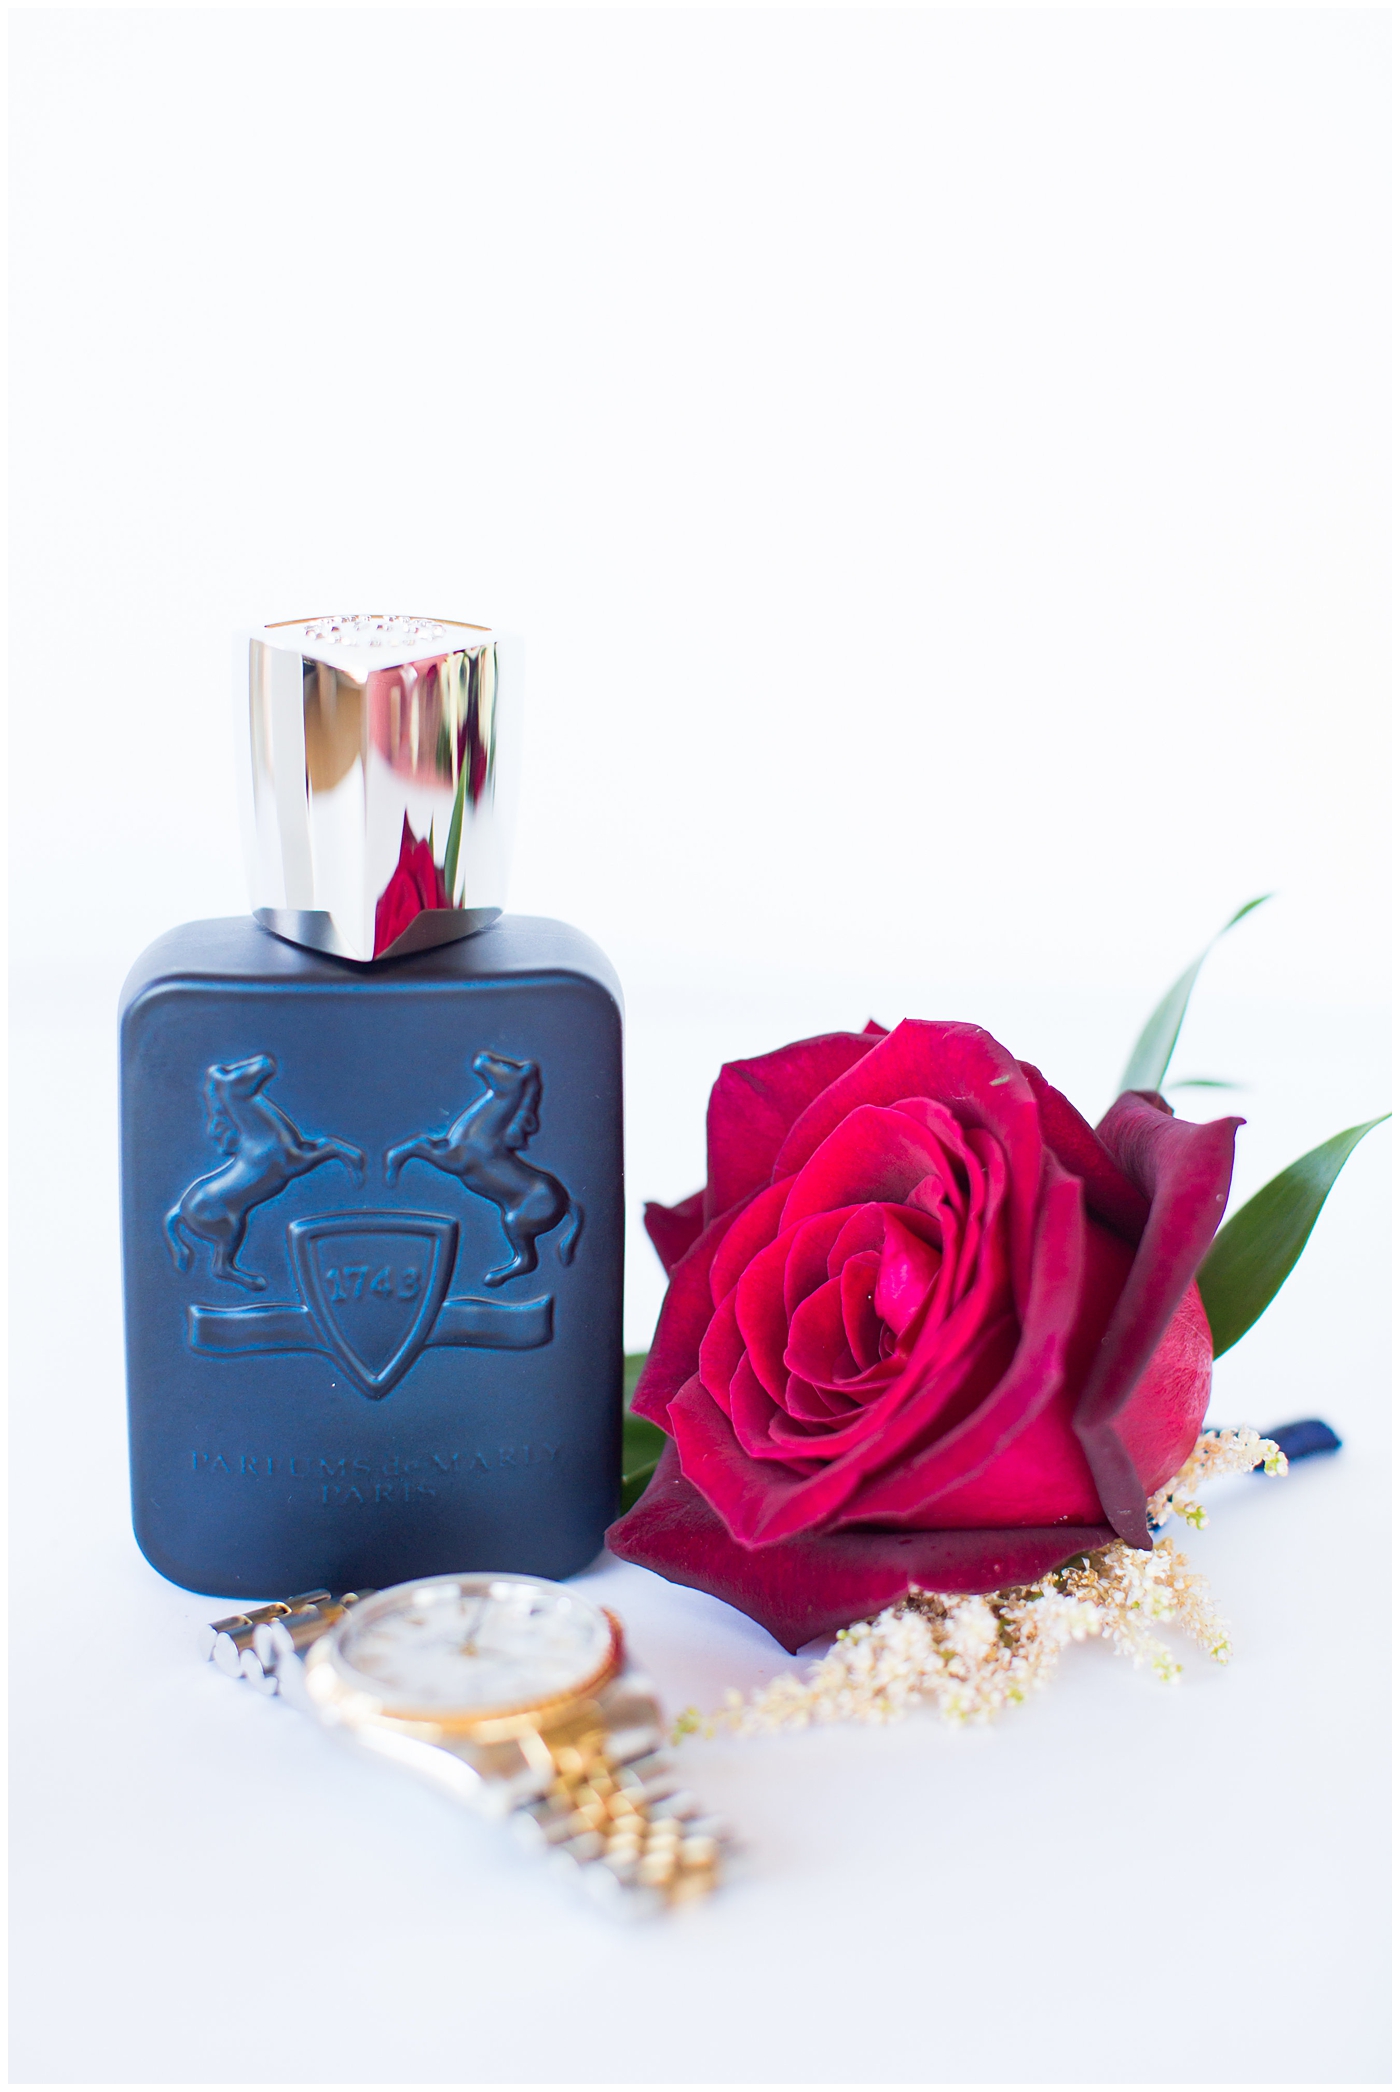 groom cologne with red rose boutonniere and watch